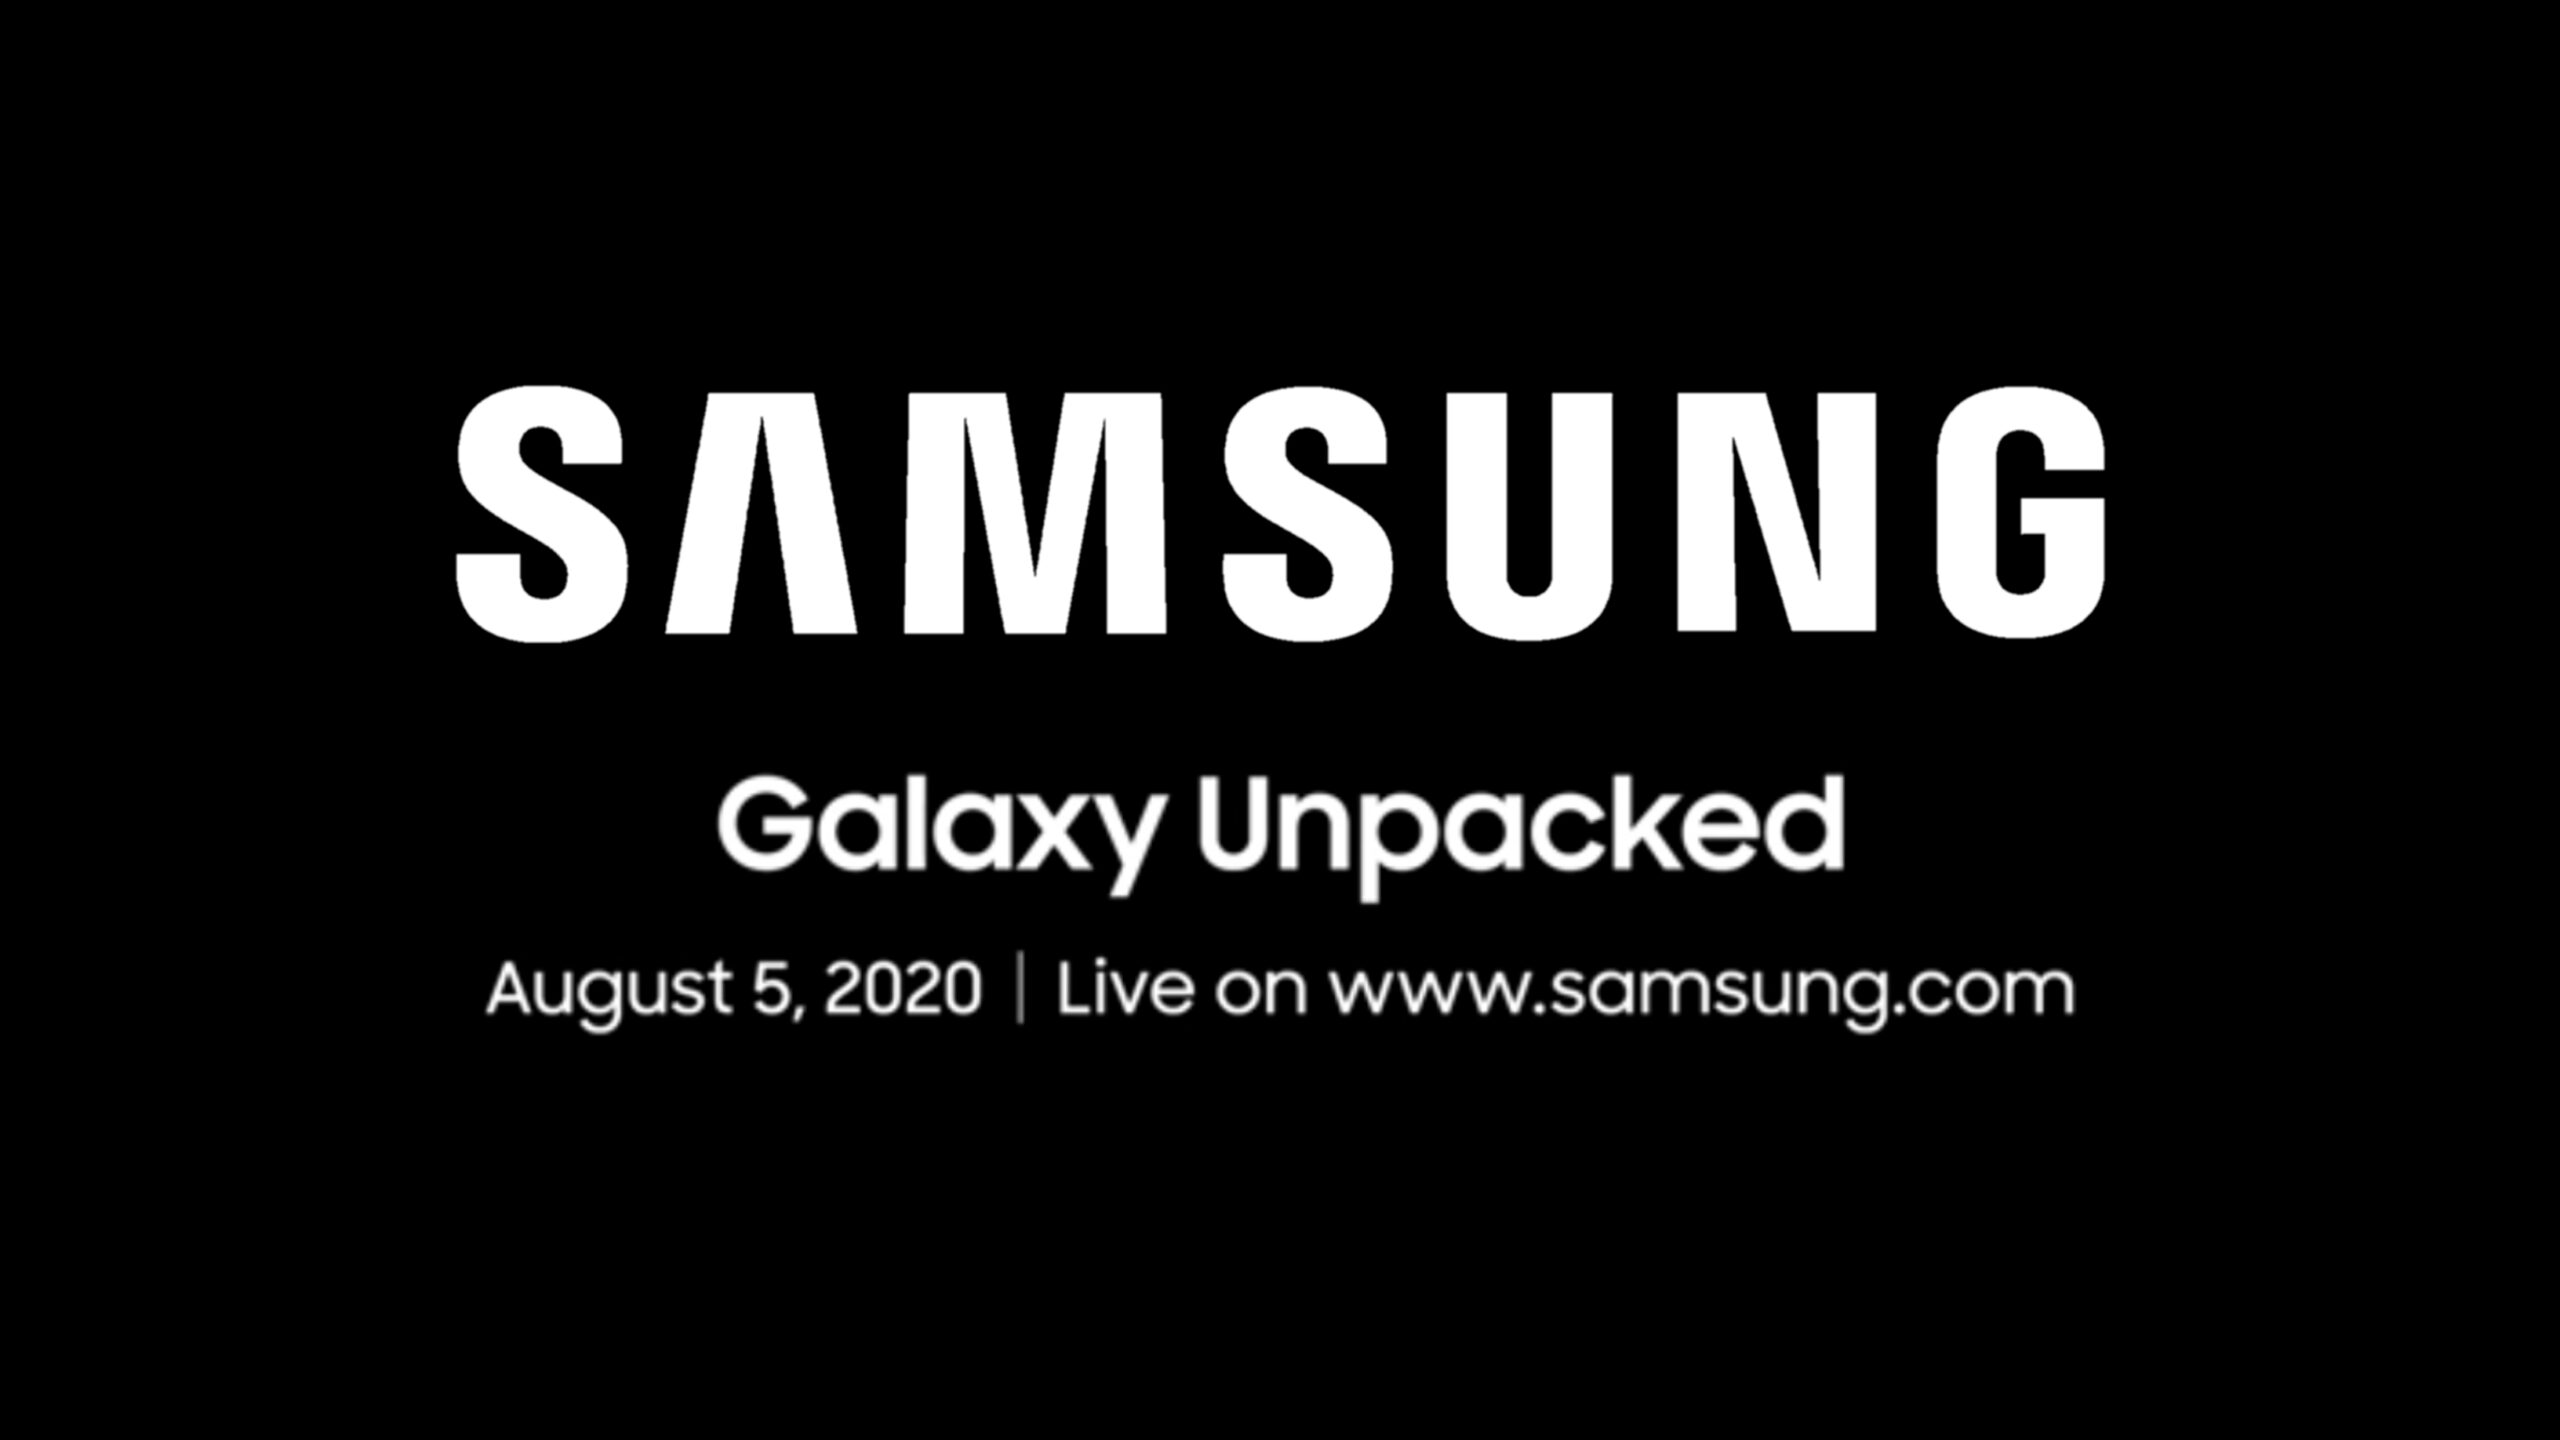 Samsung Unpacked event 2020|Samsung will reveal three new devices